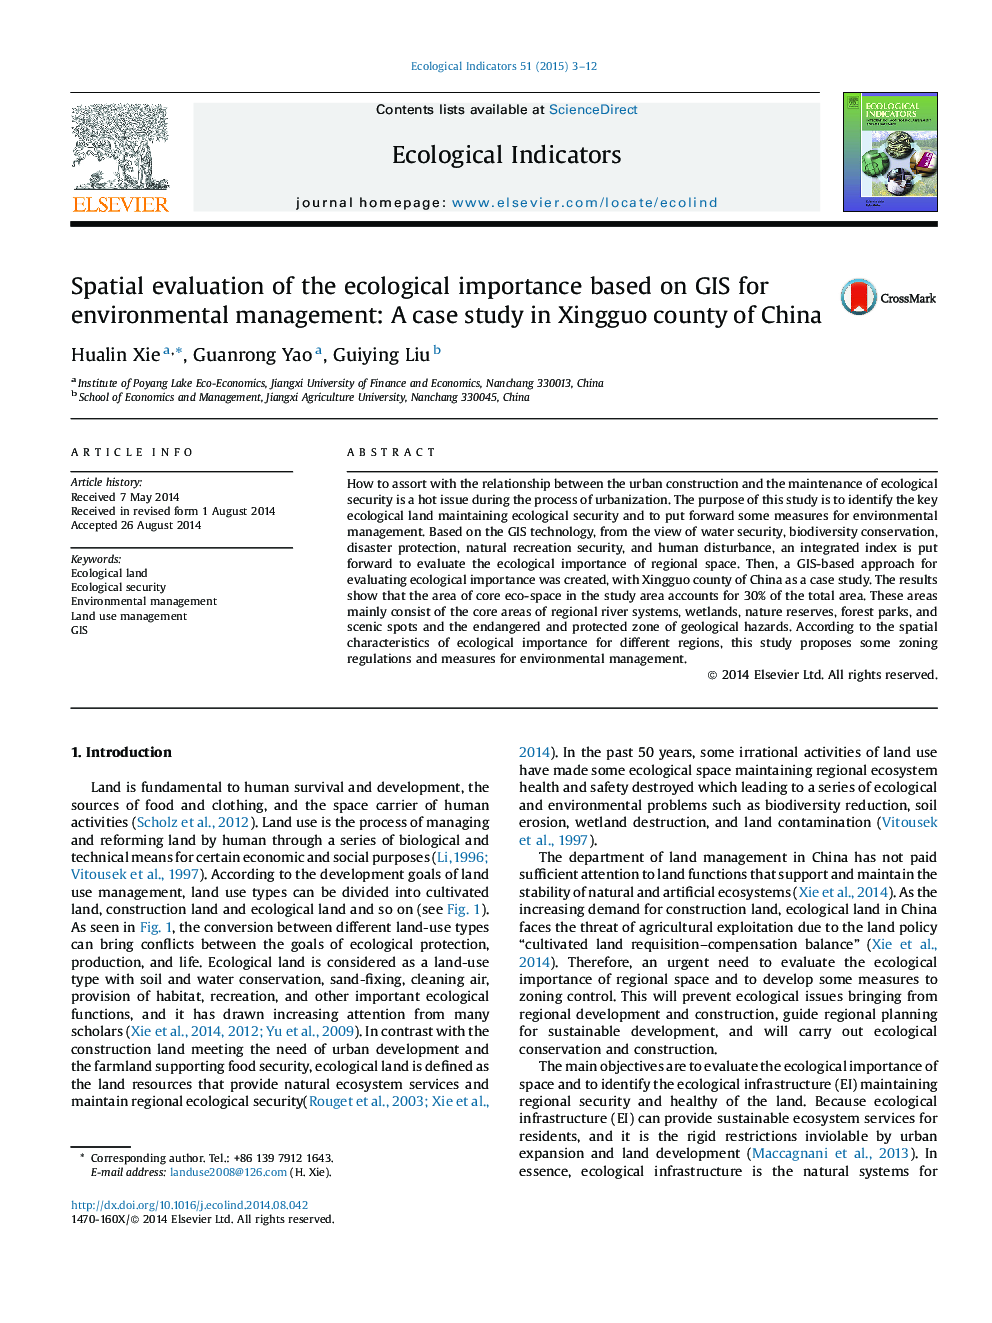 Spatial evaluation of the ecological importance based on GIS for environmental management: A case study in Xingguo county of China